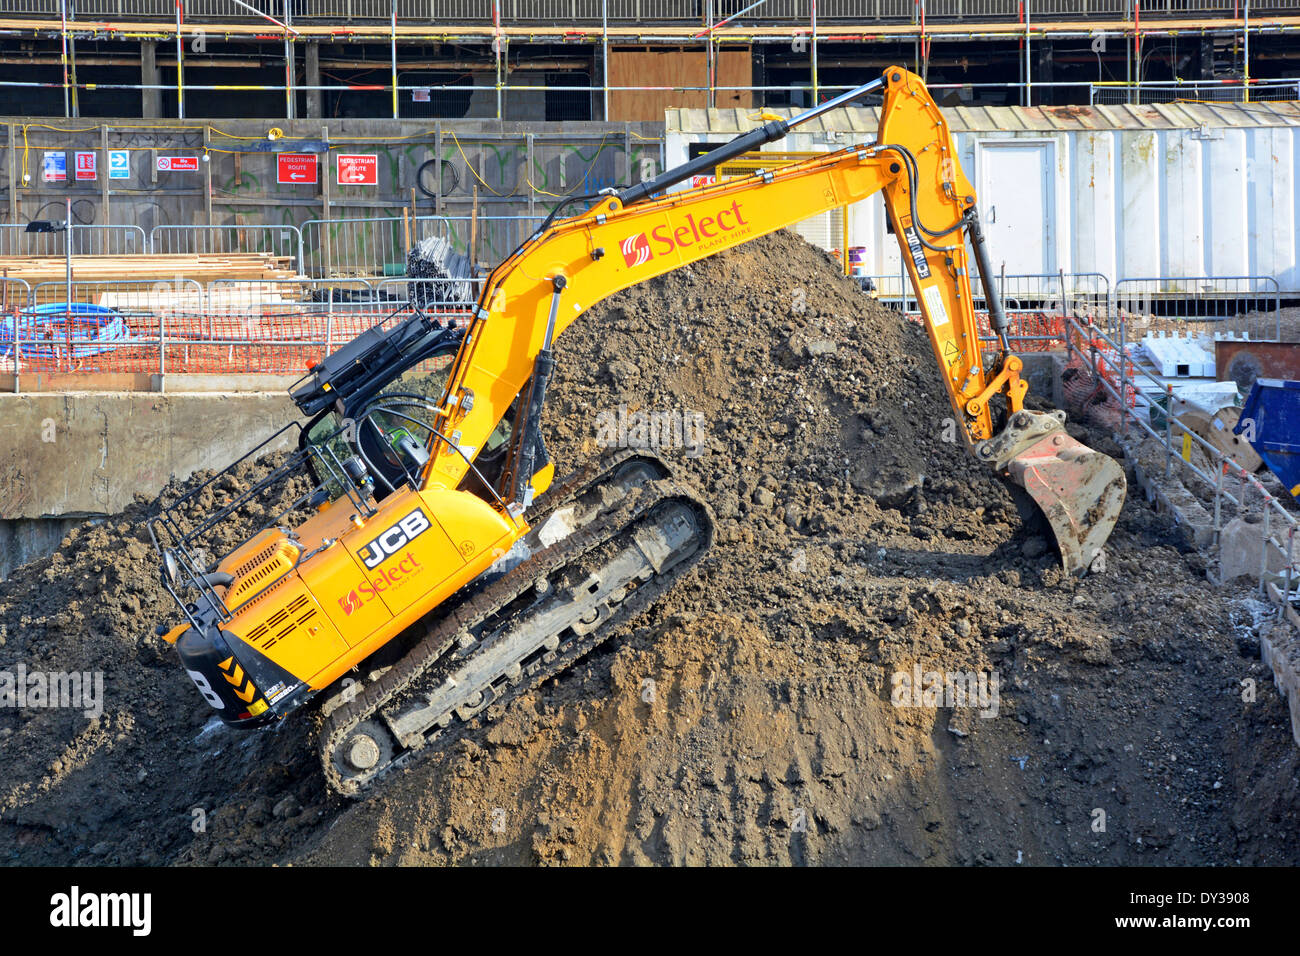 J.C. Bamford (JCB) tracked excavator back actor & loader at work climbing back up to top of spoil heap on construction building site London England UK Stock Photo